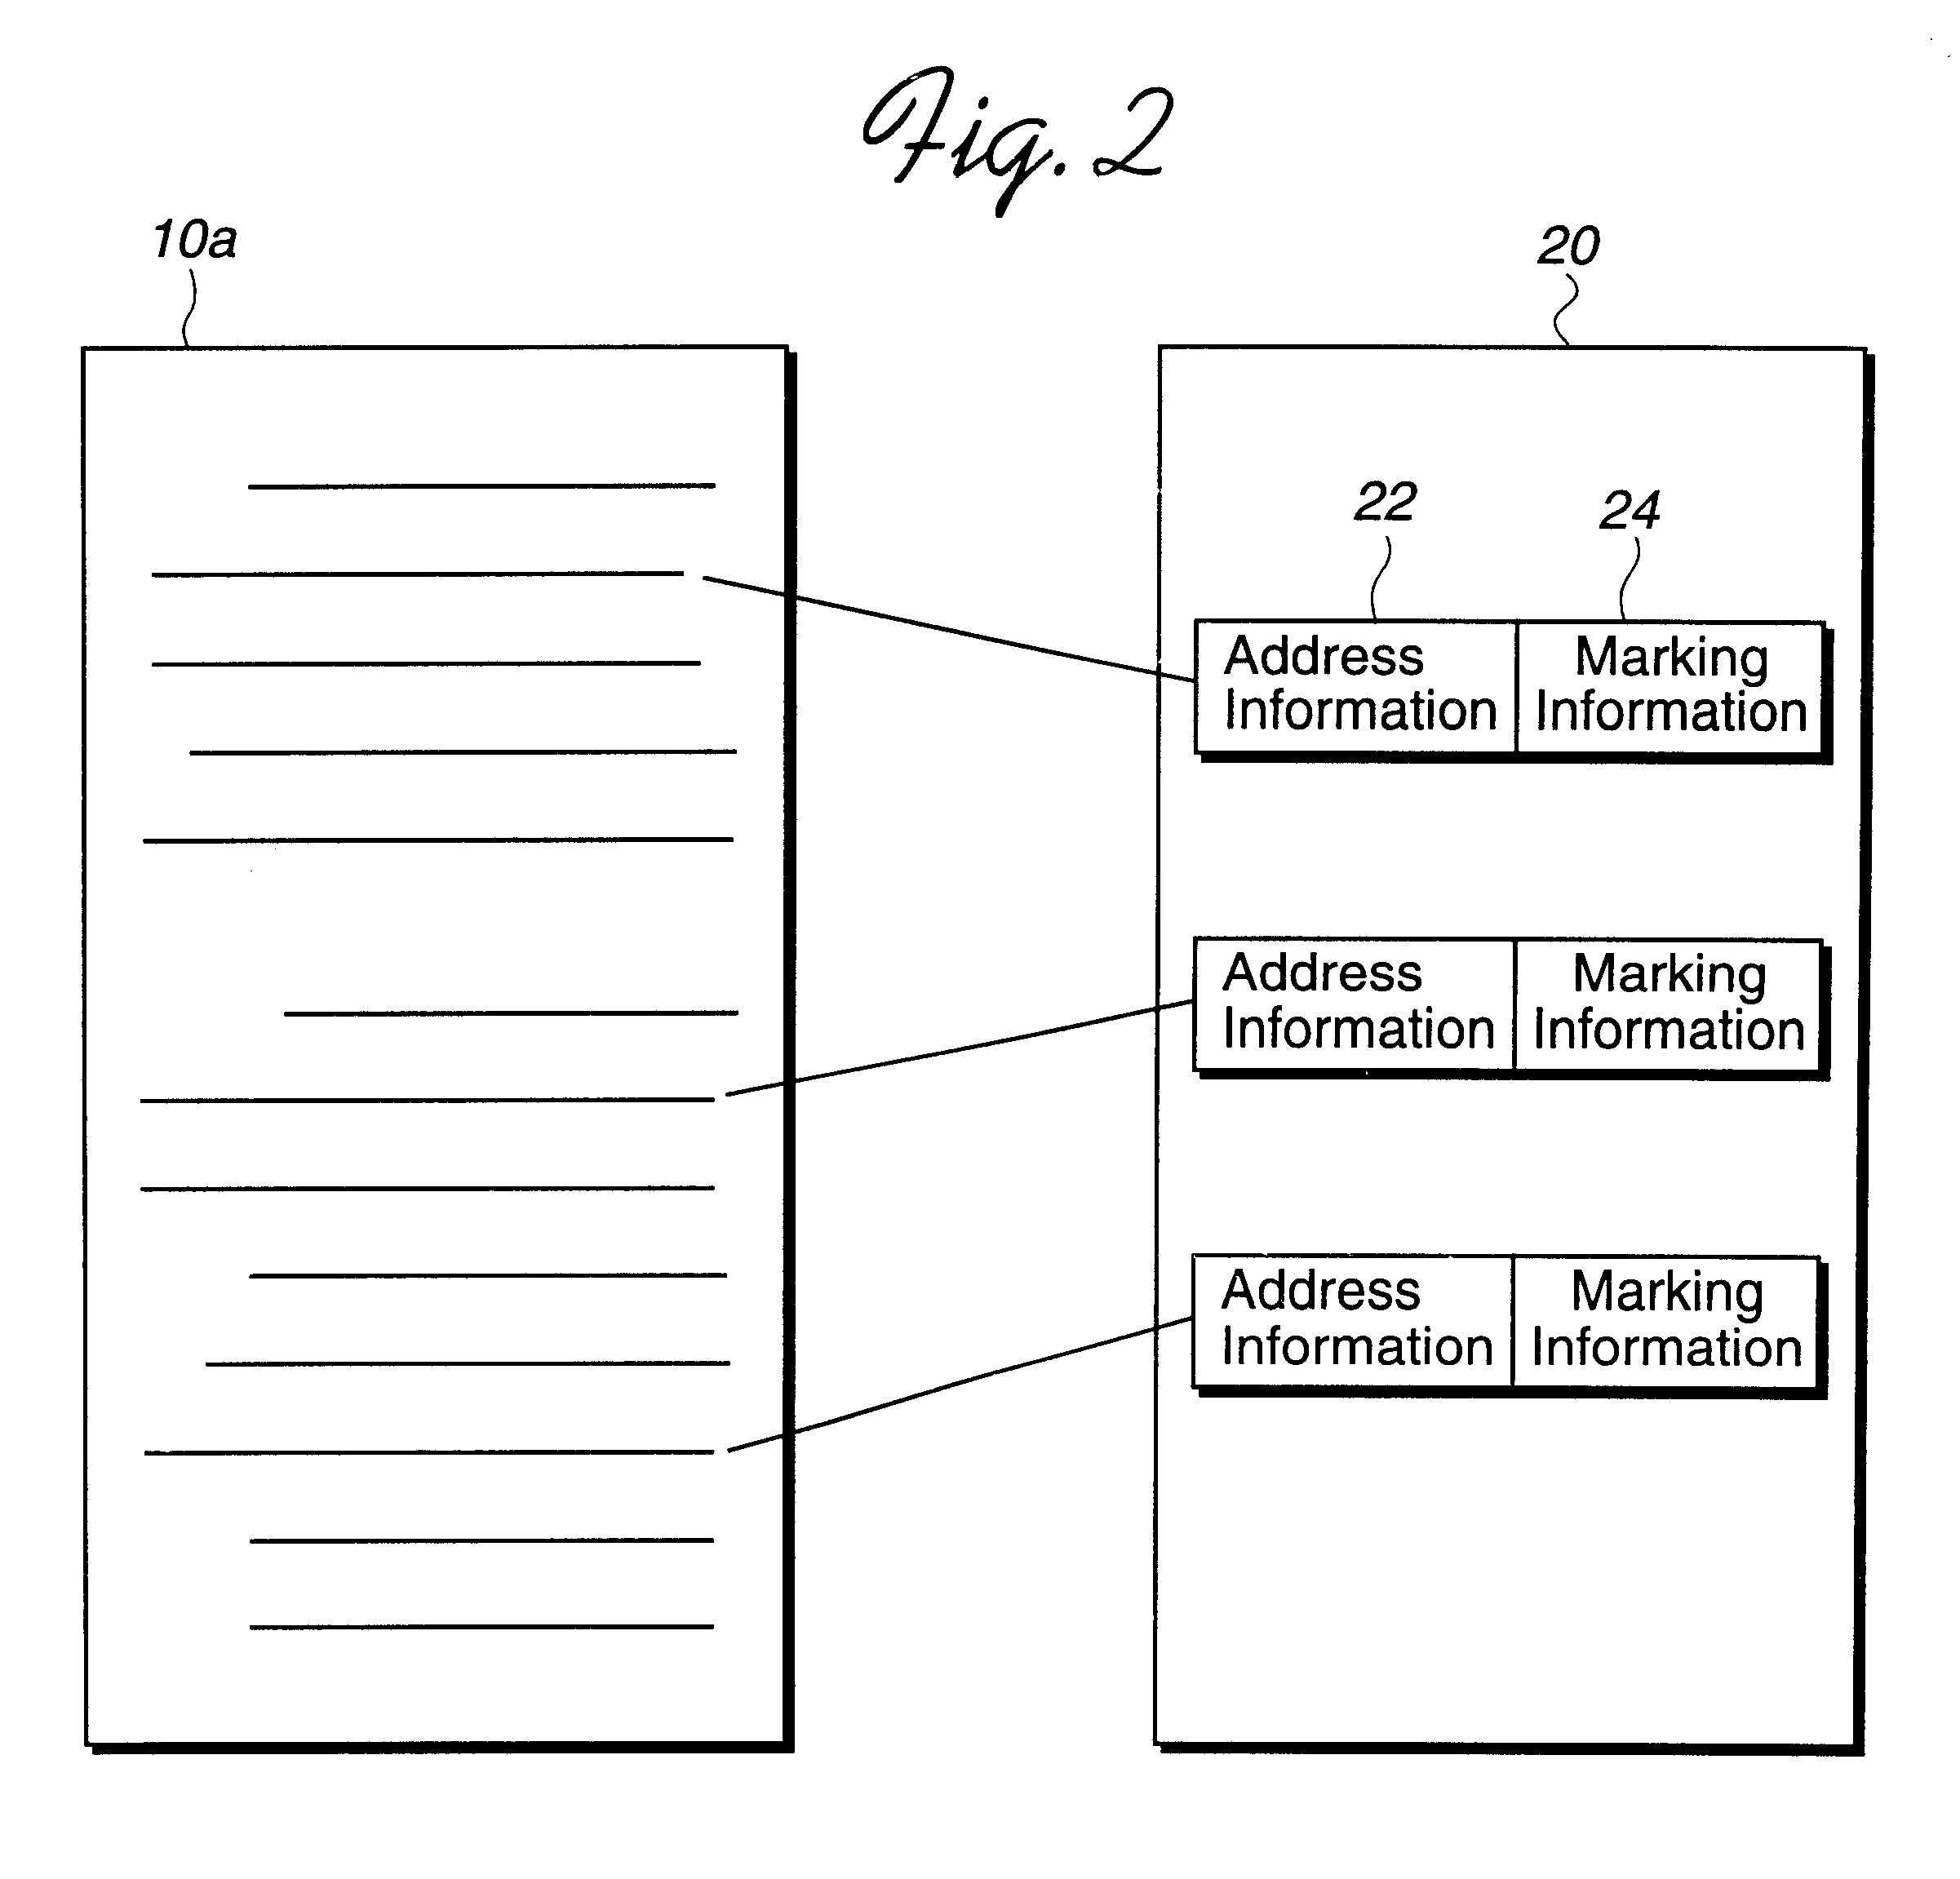 Method, system, and program for storing and retrieving markings for display to an electronic media file